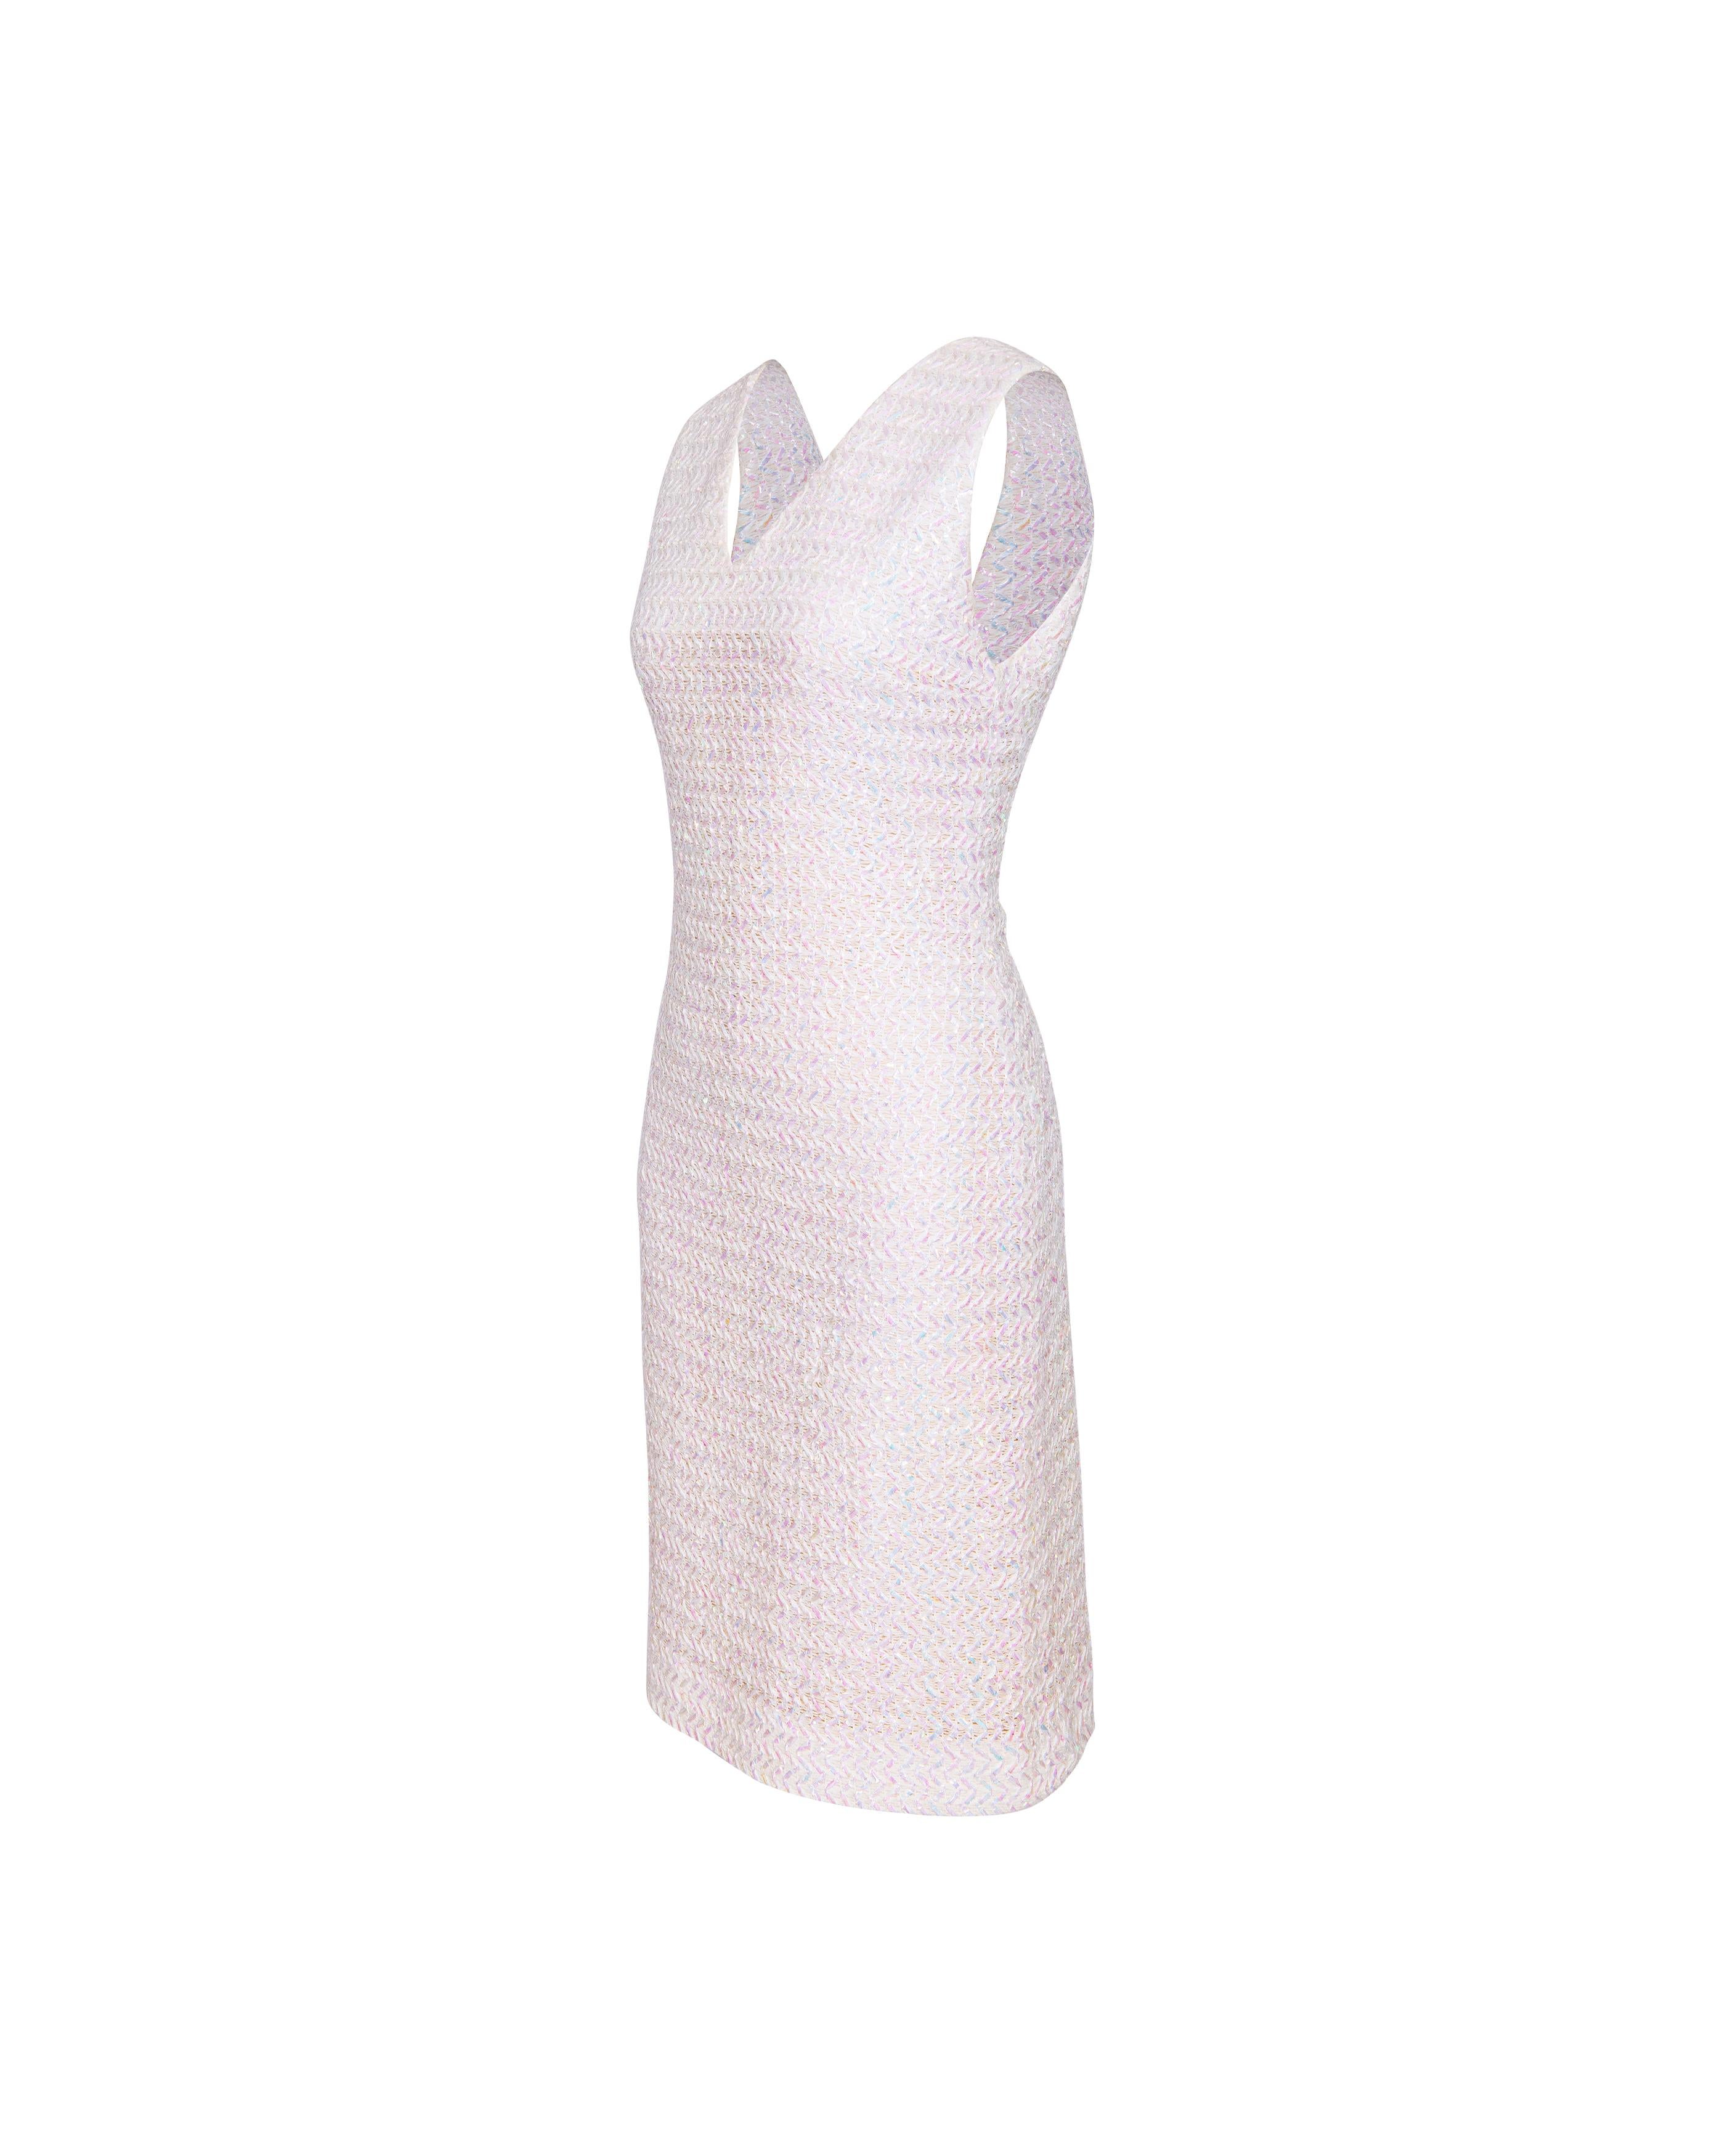 S/S 1992 Chanel by Karl Lagerfeld Metallic Above-Knee Sheath Dress In Good Condition In North Hollywood, CA